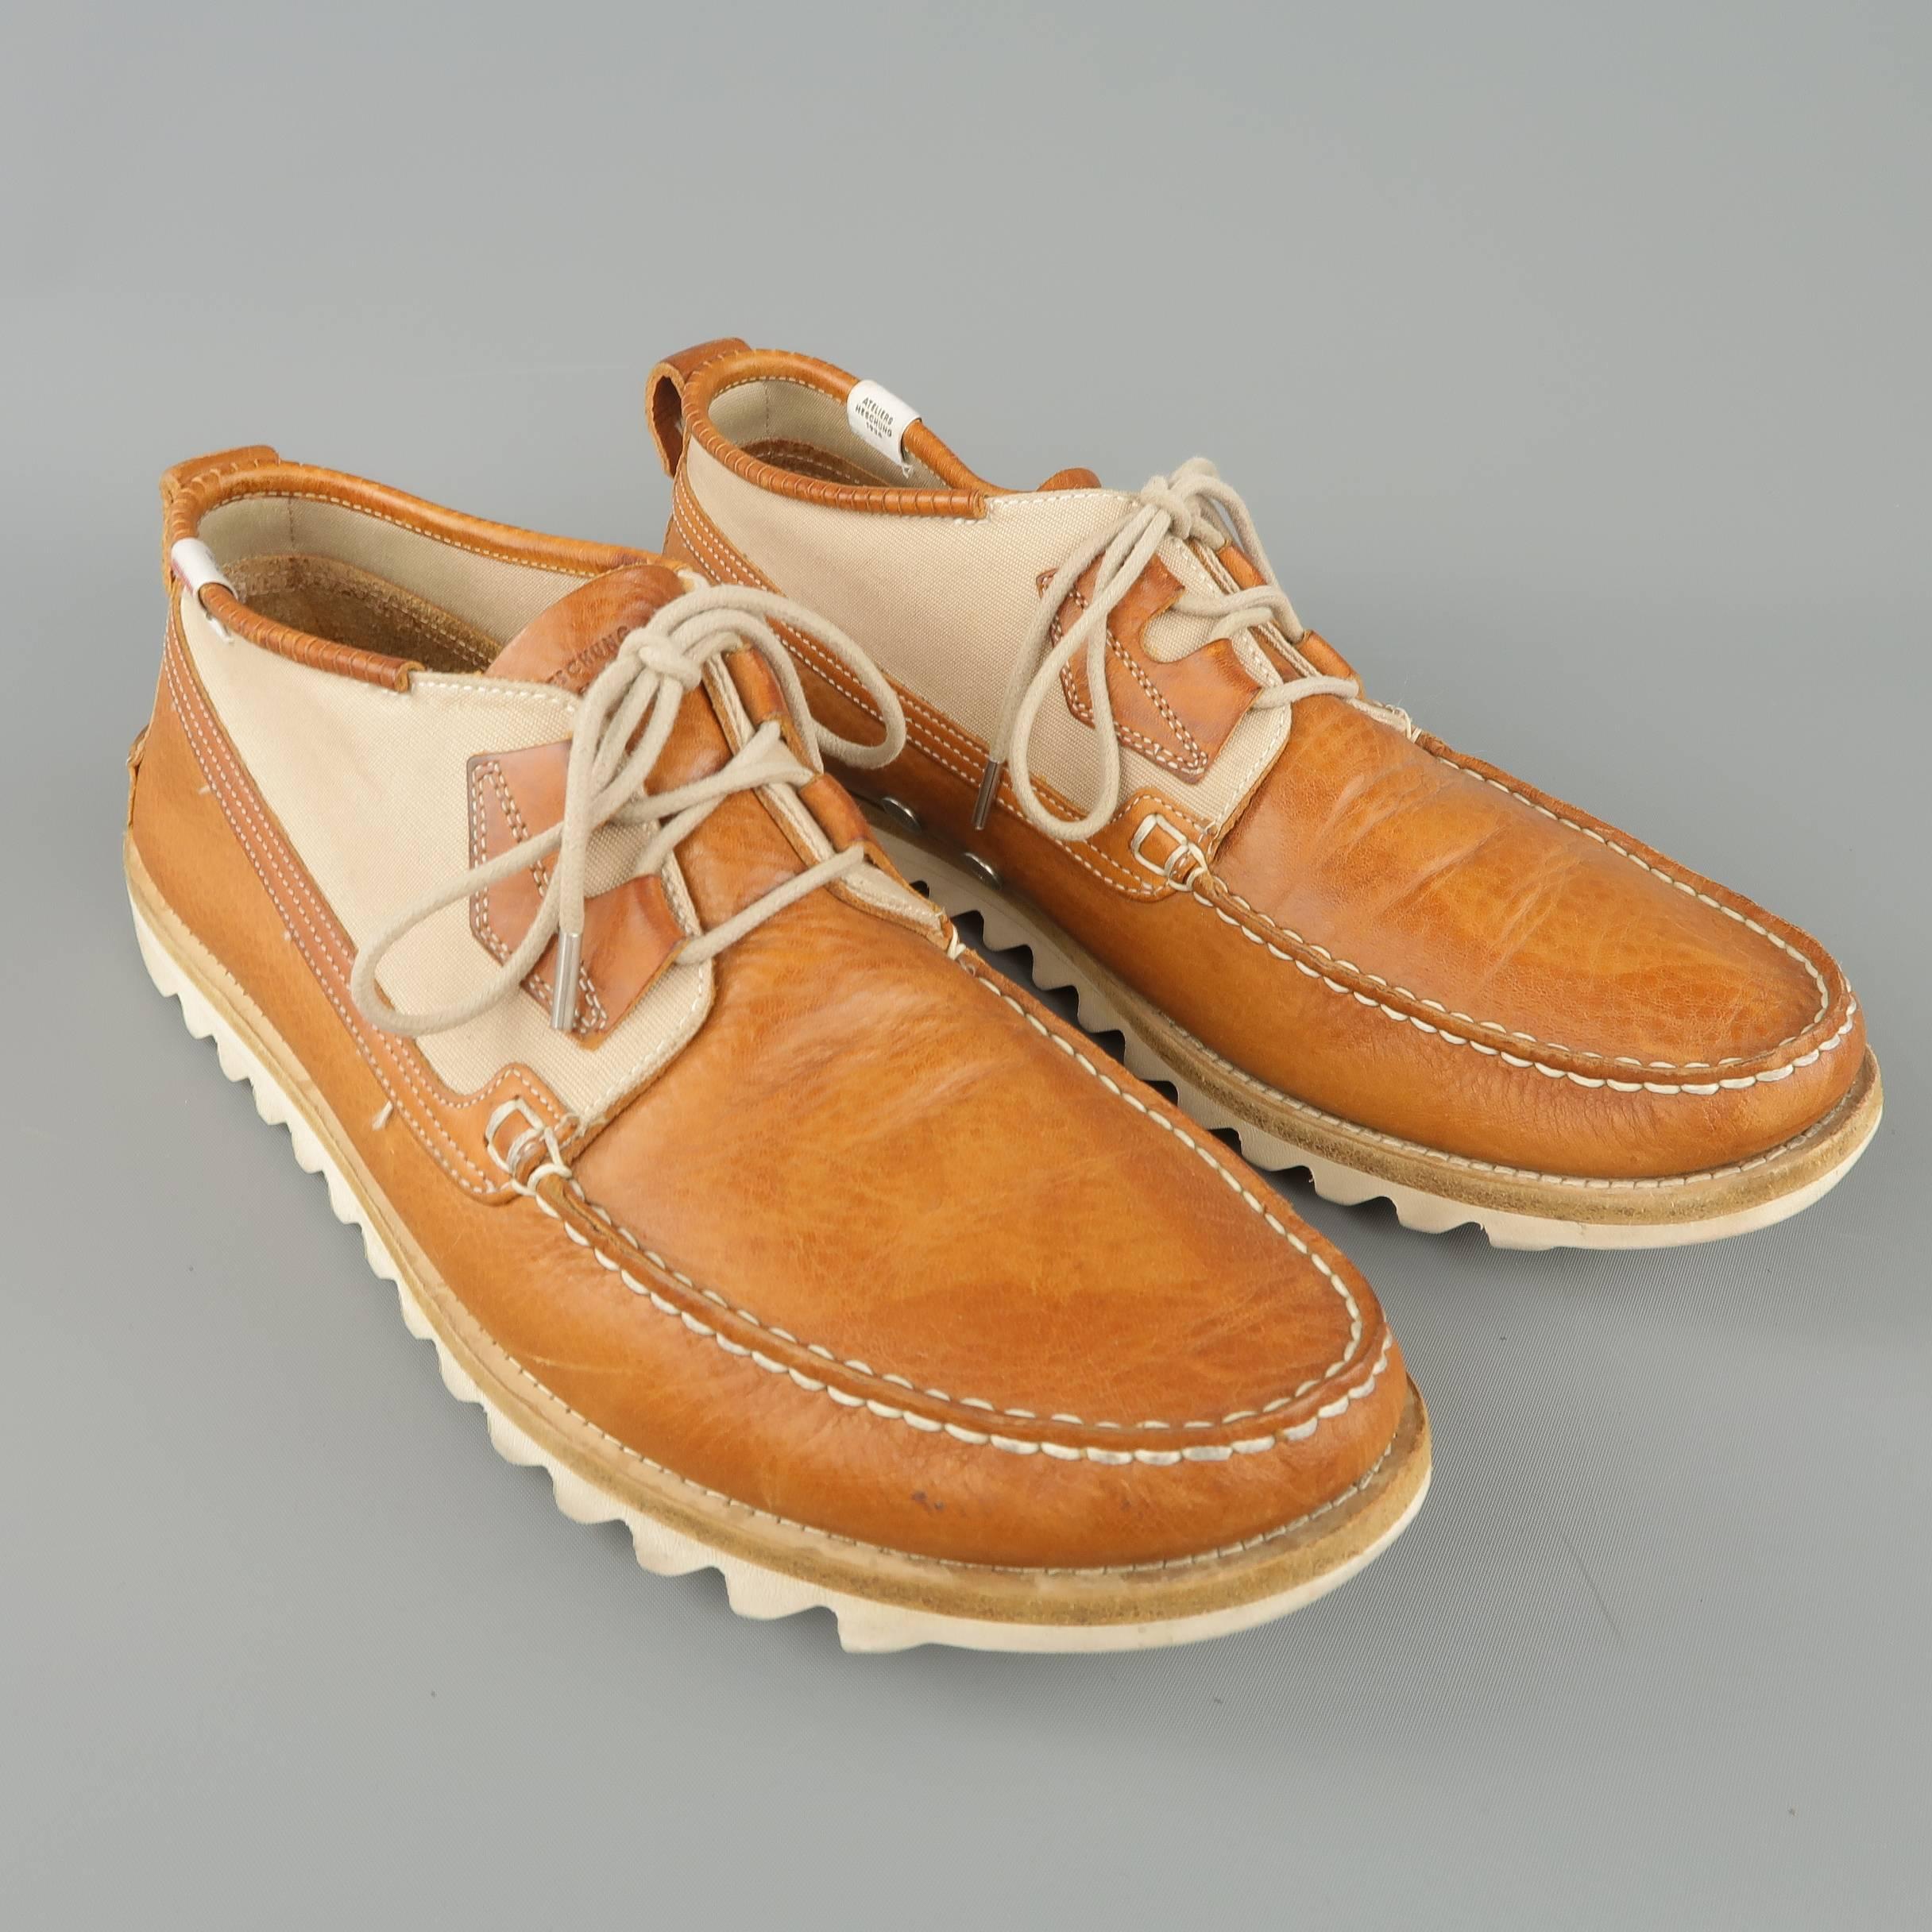 HESCHUNG boat shoe comes in tan leather with an apron toe, canvas panel, and white shark sole. Wear throughout. As-is. Made in France.
 
Fair Pre-Owned Condition.
Marked: UK 8.5
 
Outsole: 12 x 4.25 in.